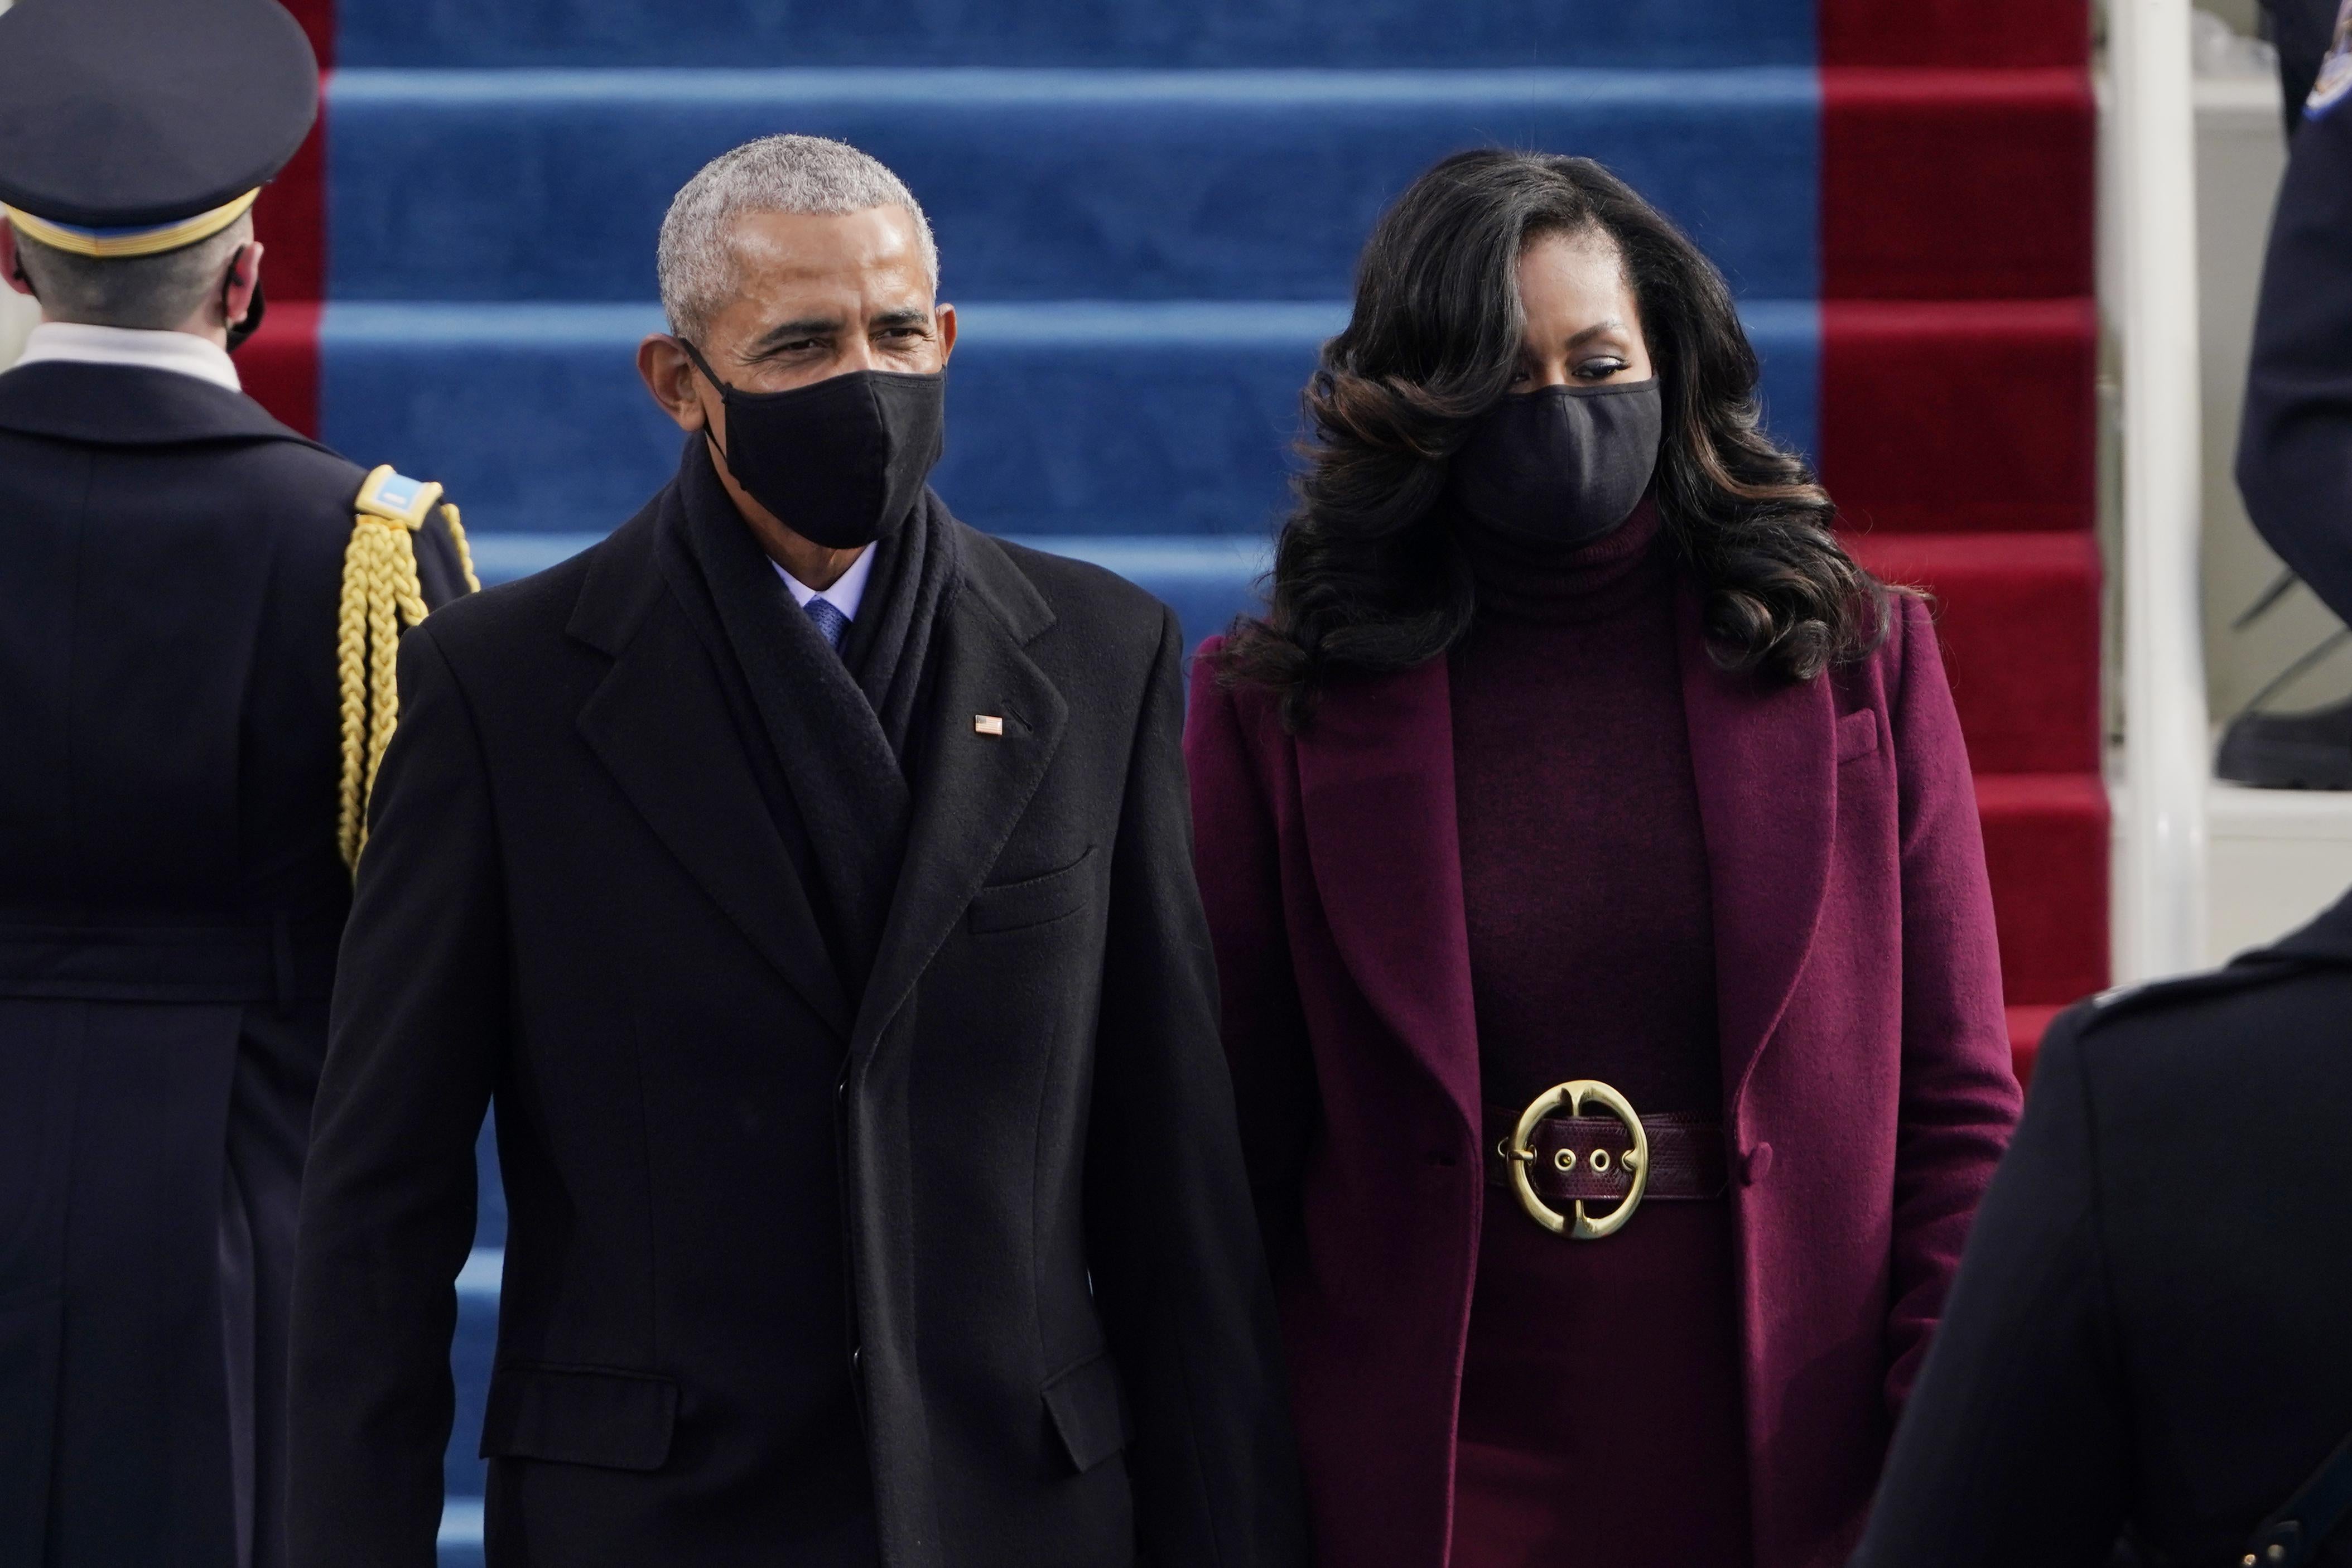 Former President Barack Obama and his wife Michelle arrive for the 59th inaugural ceremony on the West Front of the U.S. Capitol on January 20, 2021 in Washington, D.C.